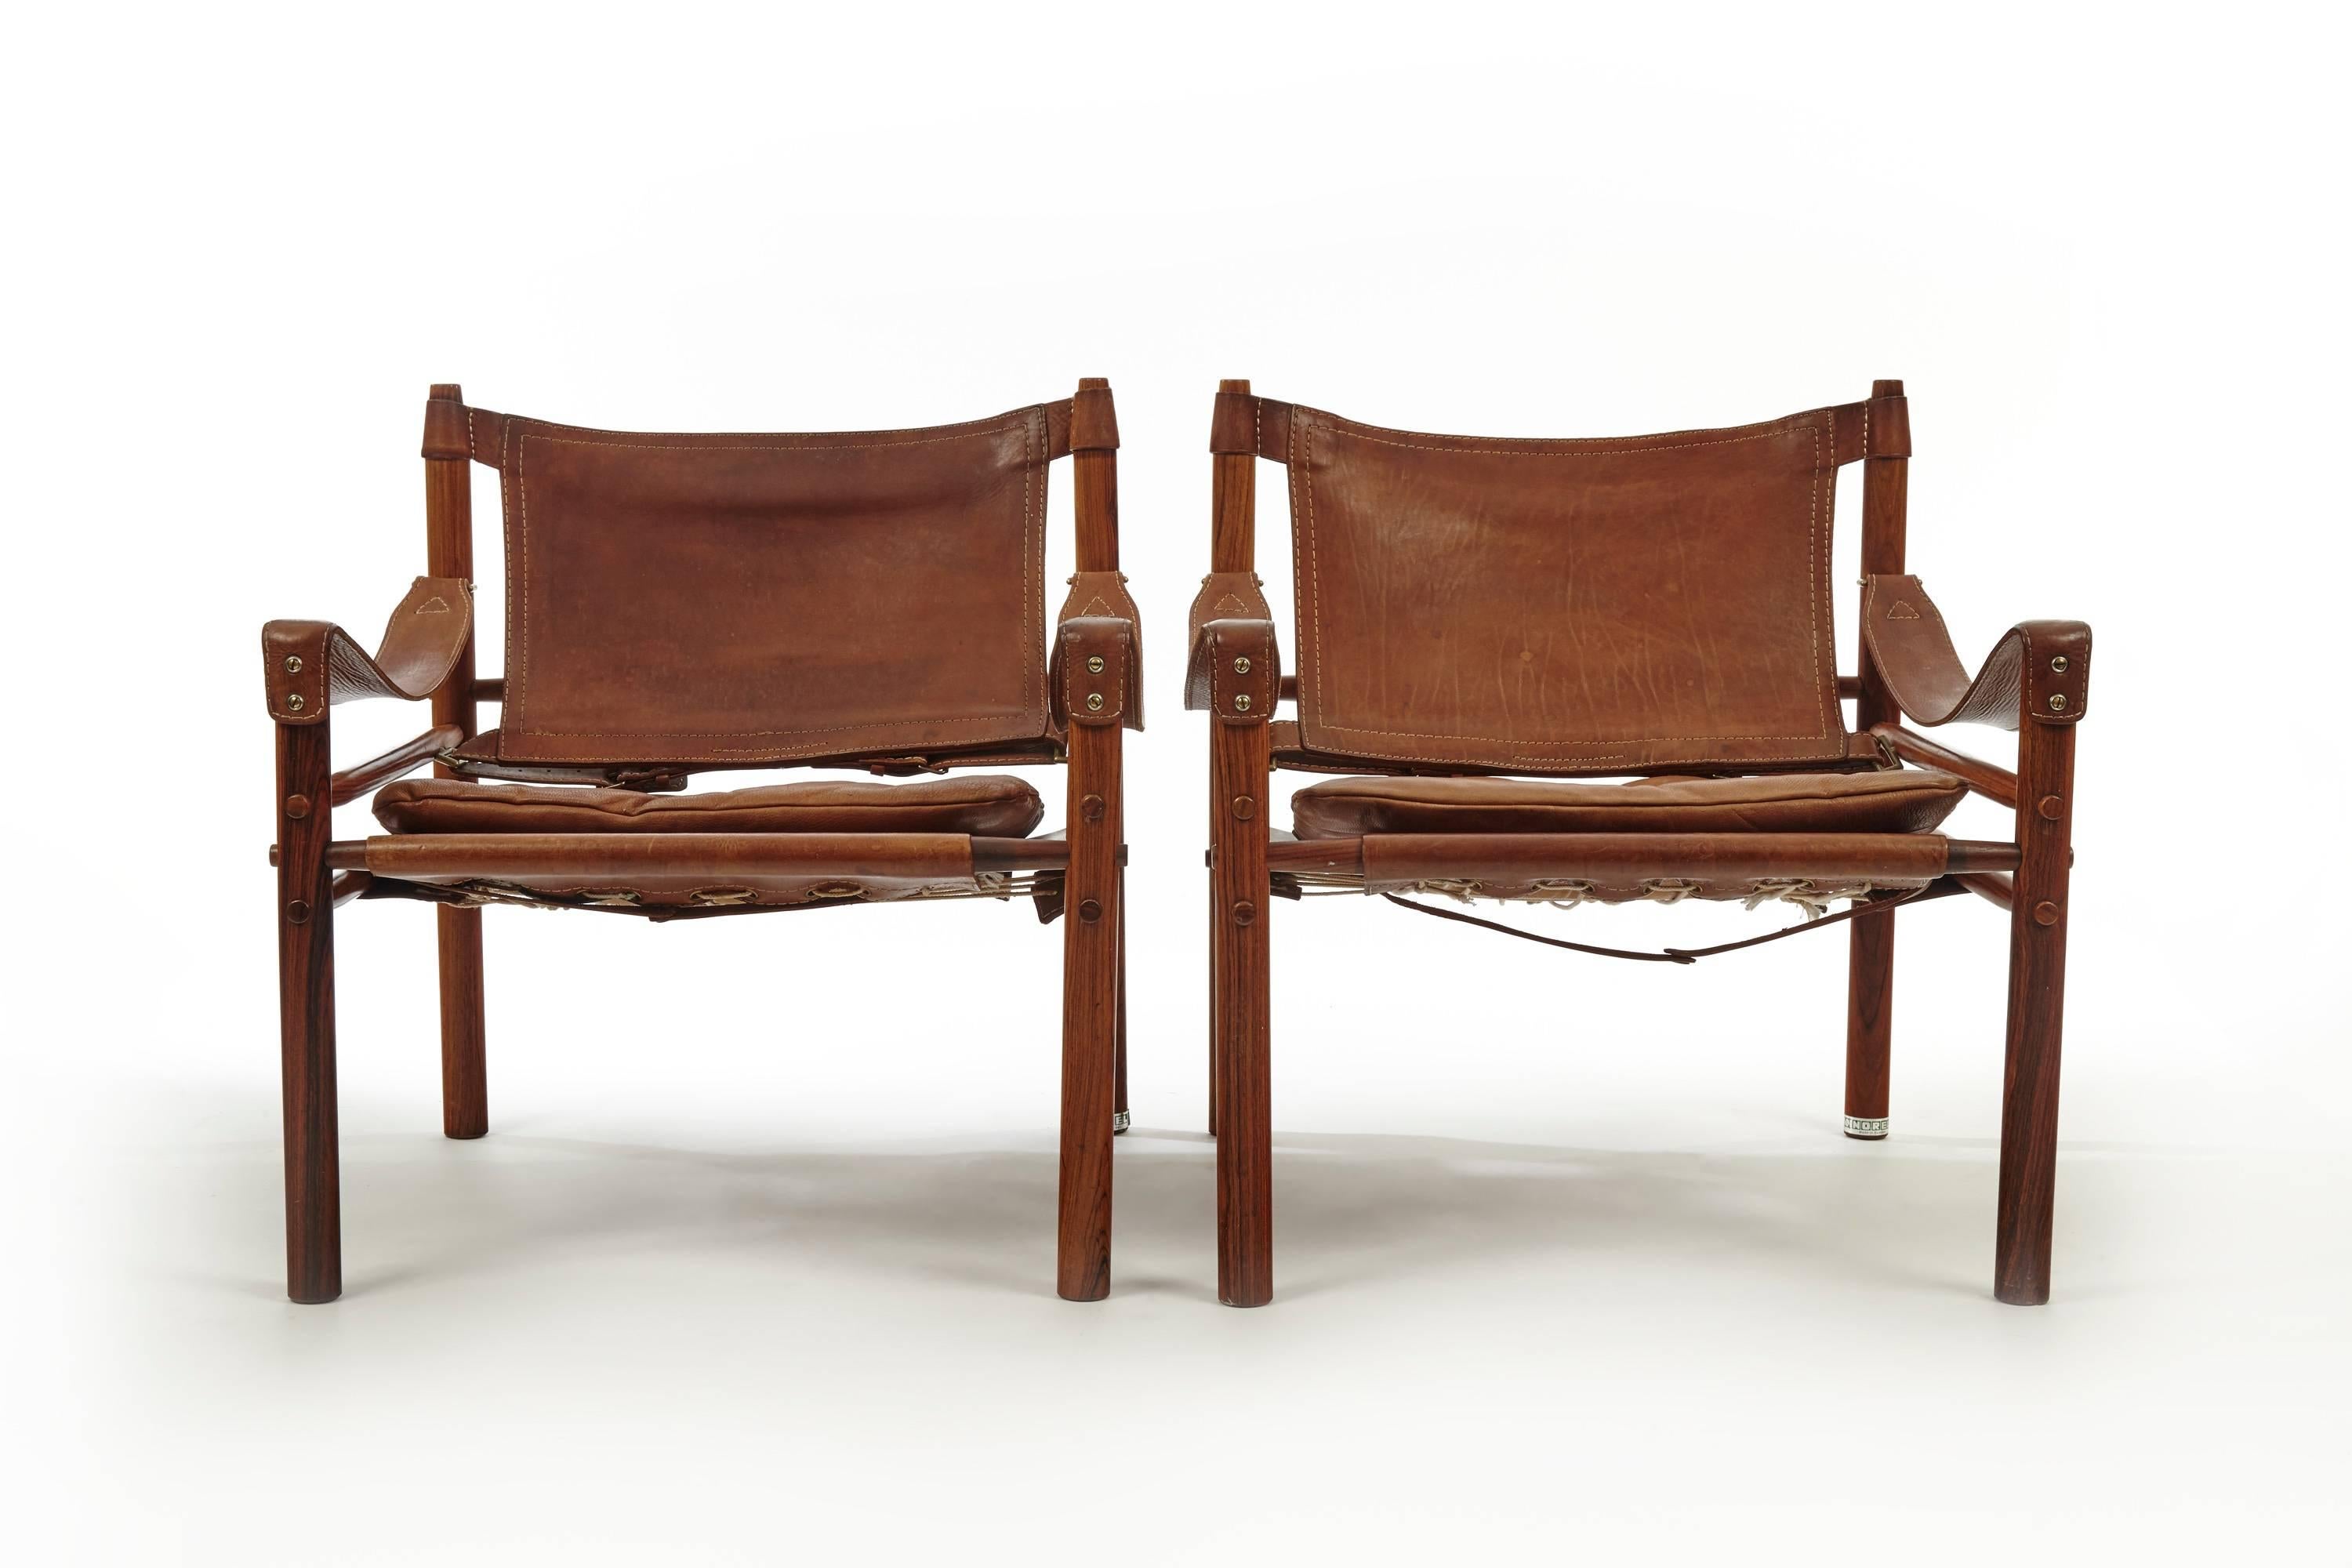 A beautiful pair of rosewood Arne Norell Safari chairs. Perfect leather patina and stunning rosewood grain. Made by Aneby Mobler in Sweden with makers label intact. Some signs of wear and use, relative to age and use. Fast and inexpensive shipping